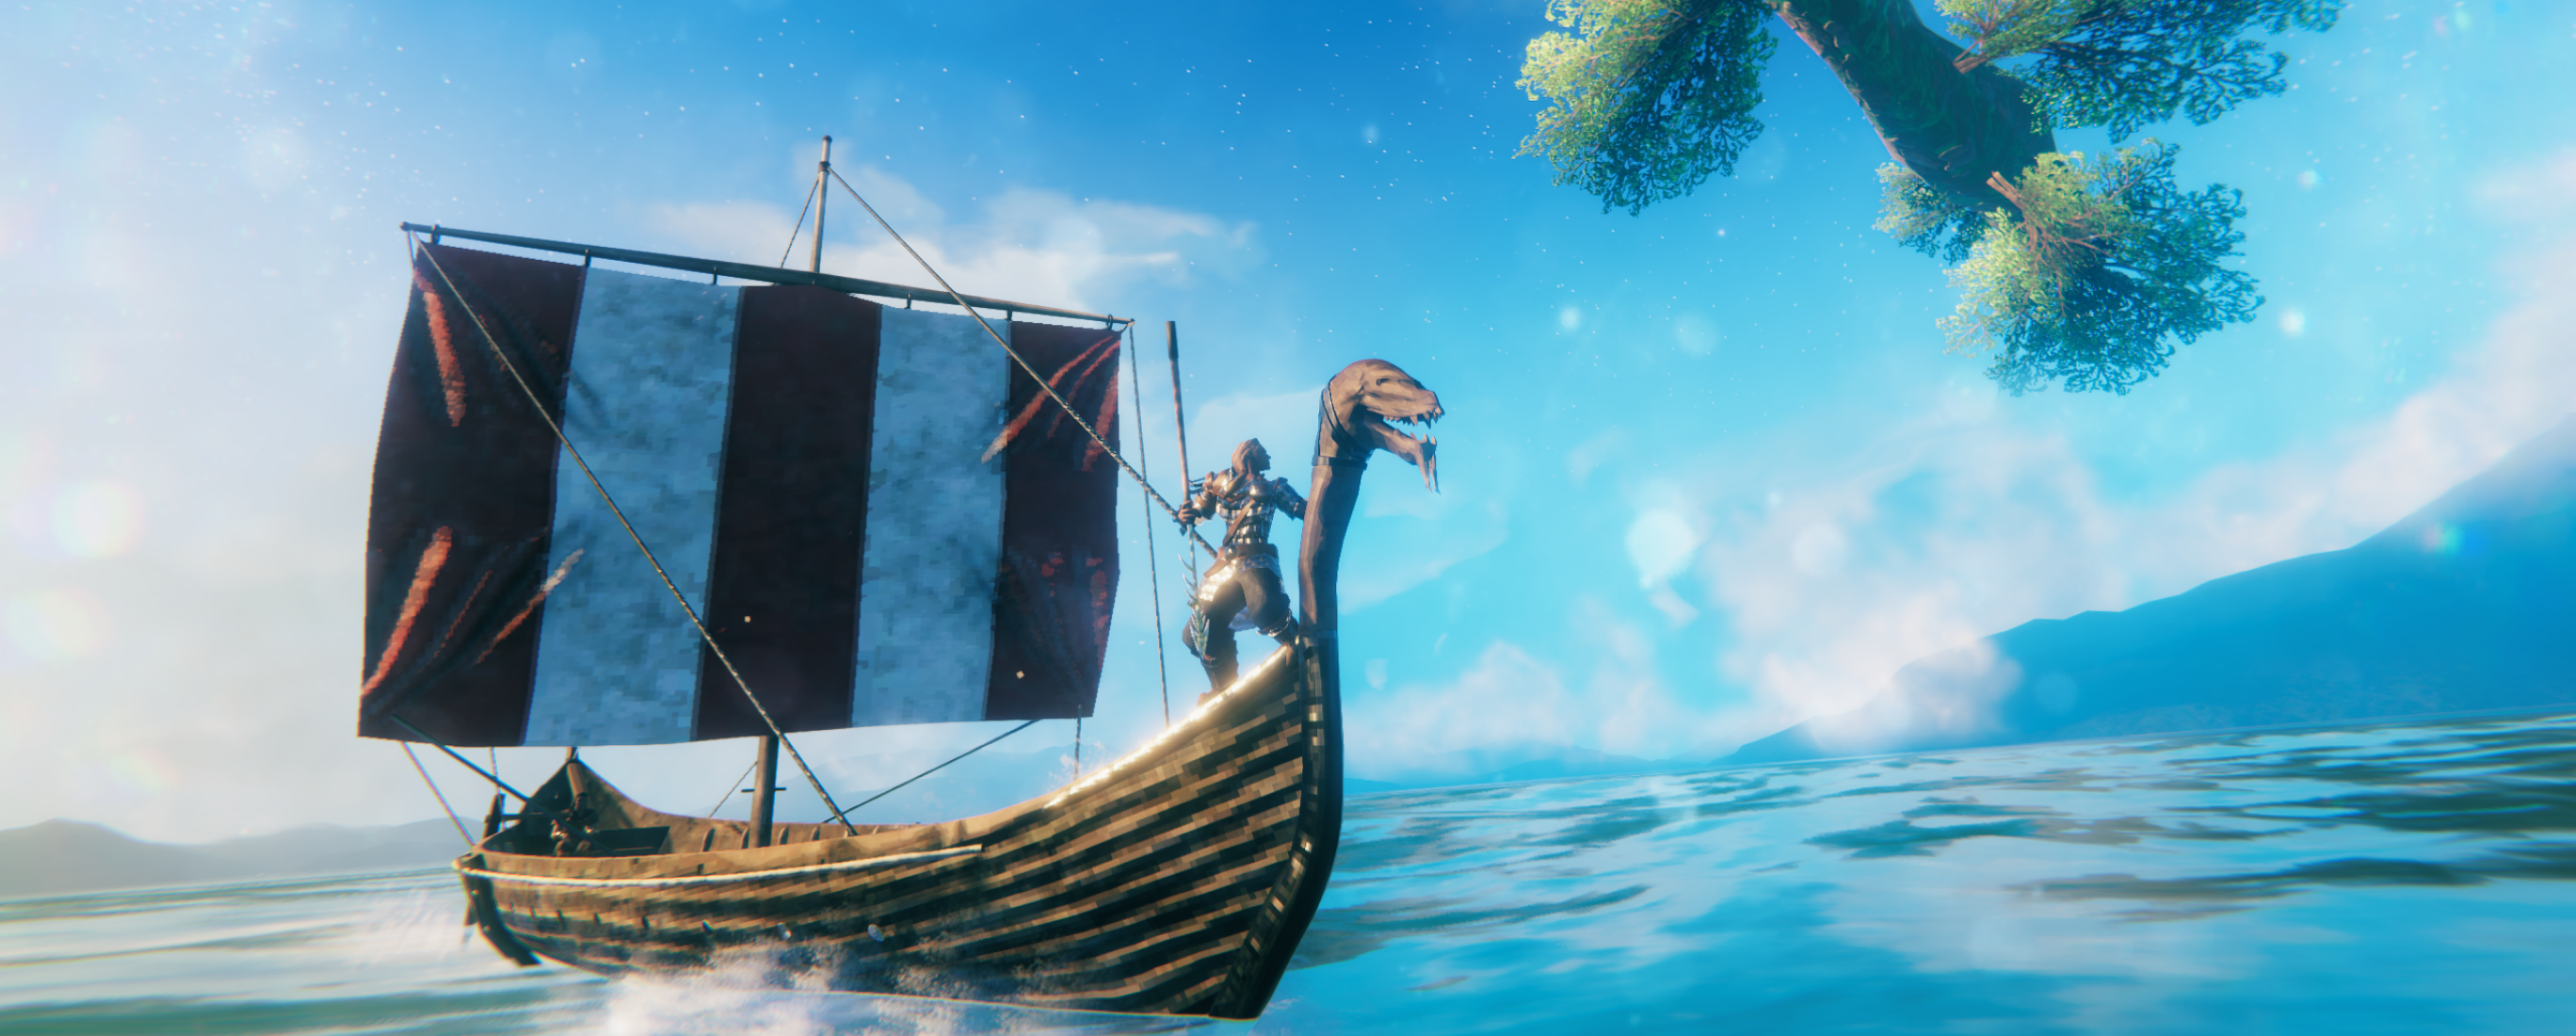 A viking traversing the Valheim seas using a technological marvel - the boat.